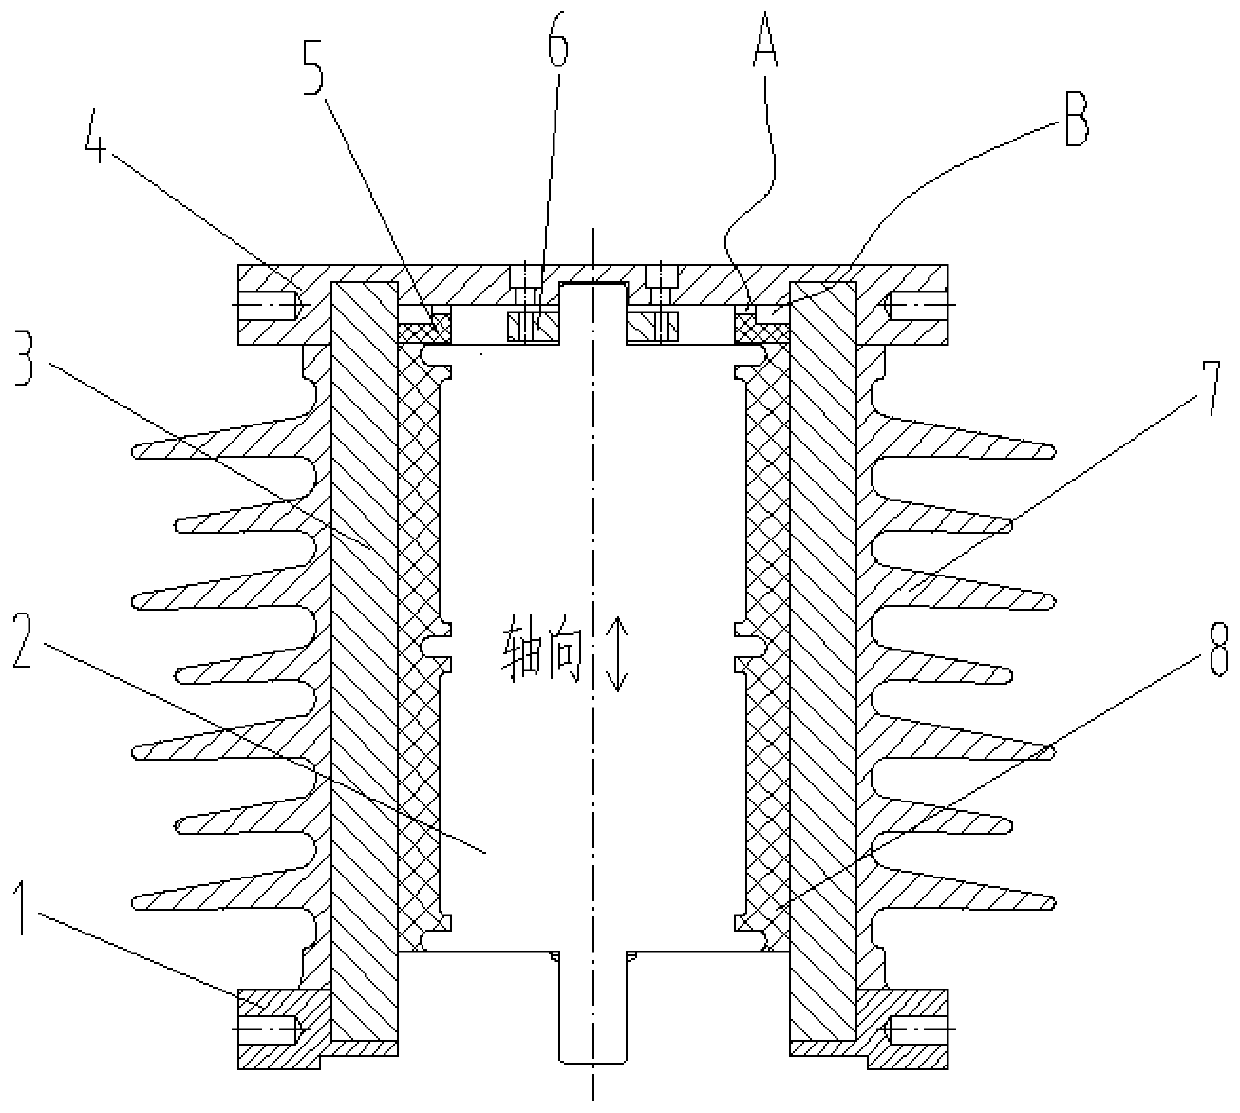 An insulator structure for protecting vacuum tubes